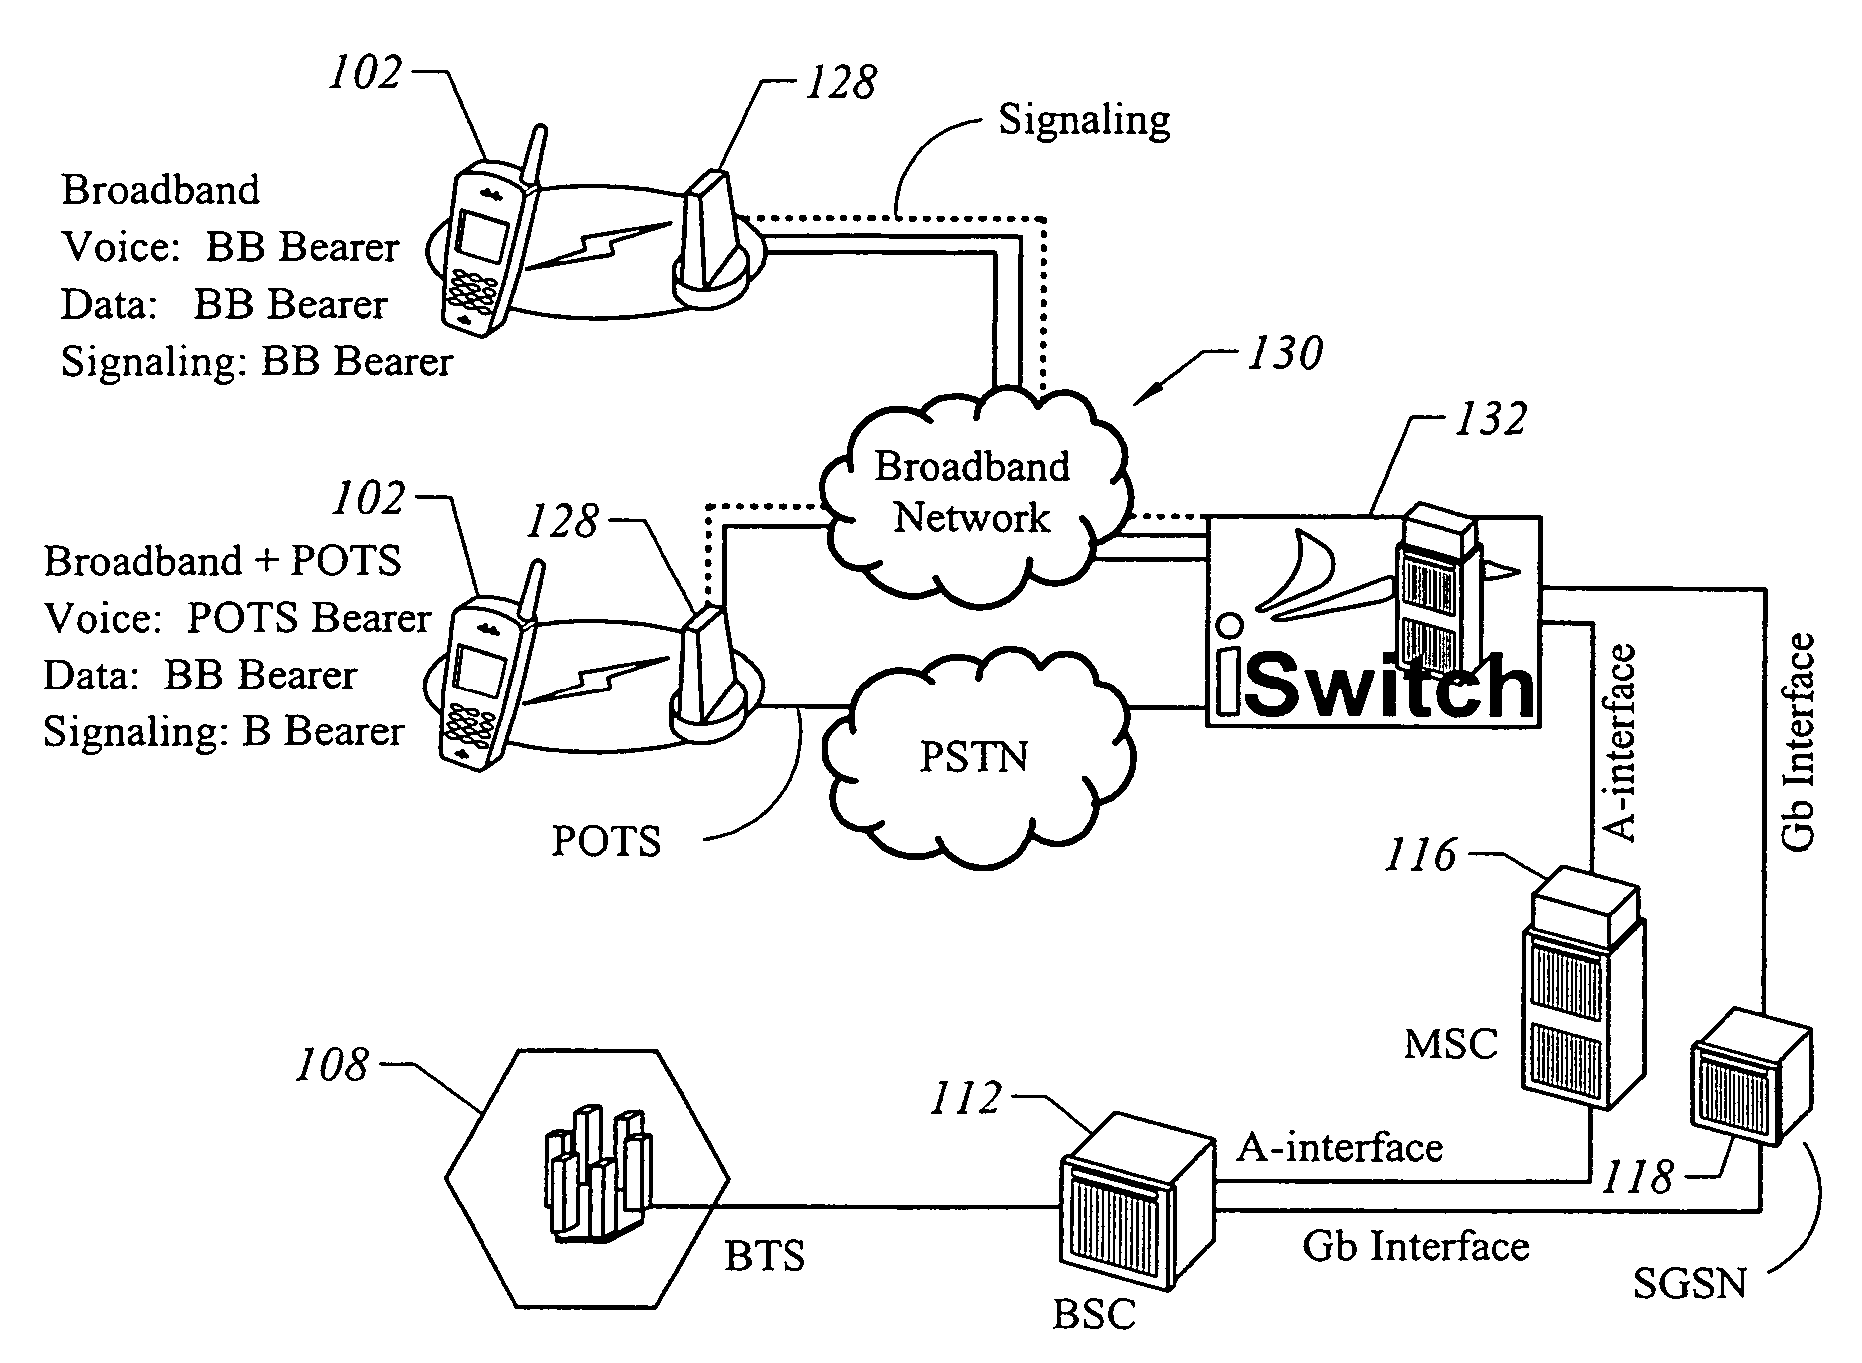 GSM signaling protocol architecture for an unlicensed wireless communication system